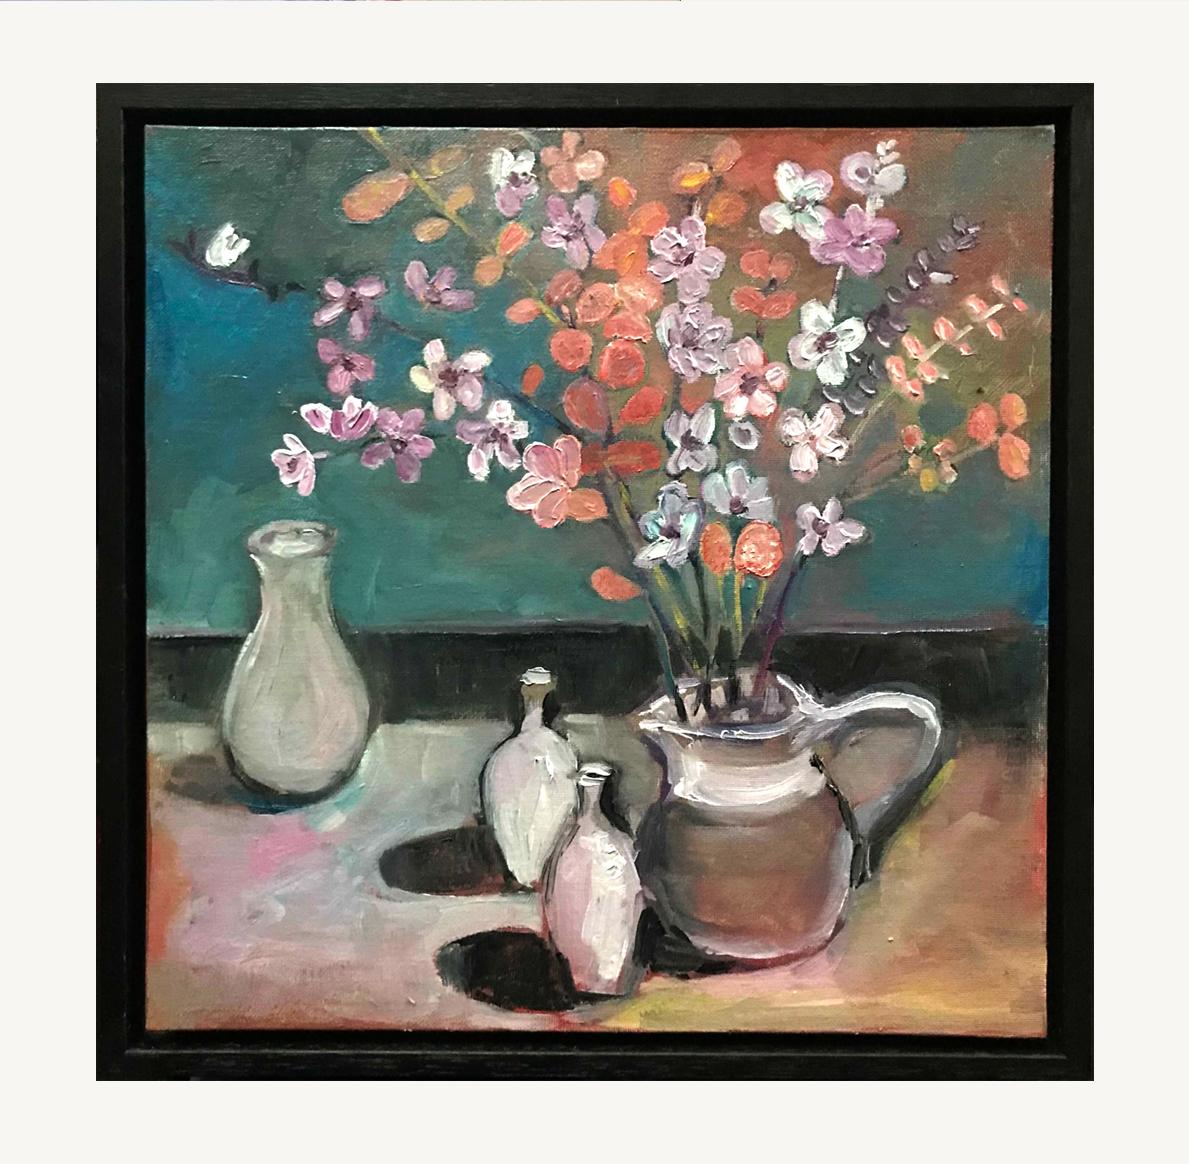 Jug with flowers, floral, still life, contemporary, wall art - Painting by Eleanor Woolley